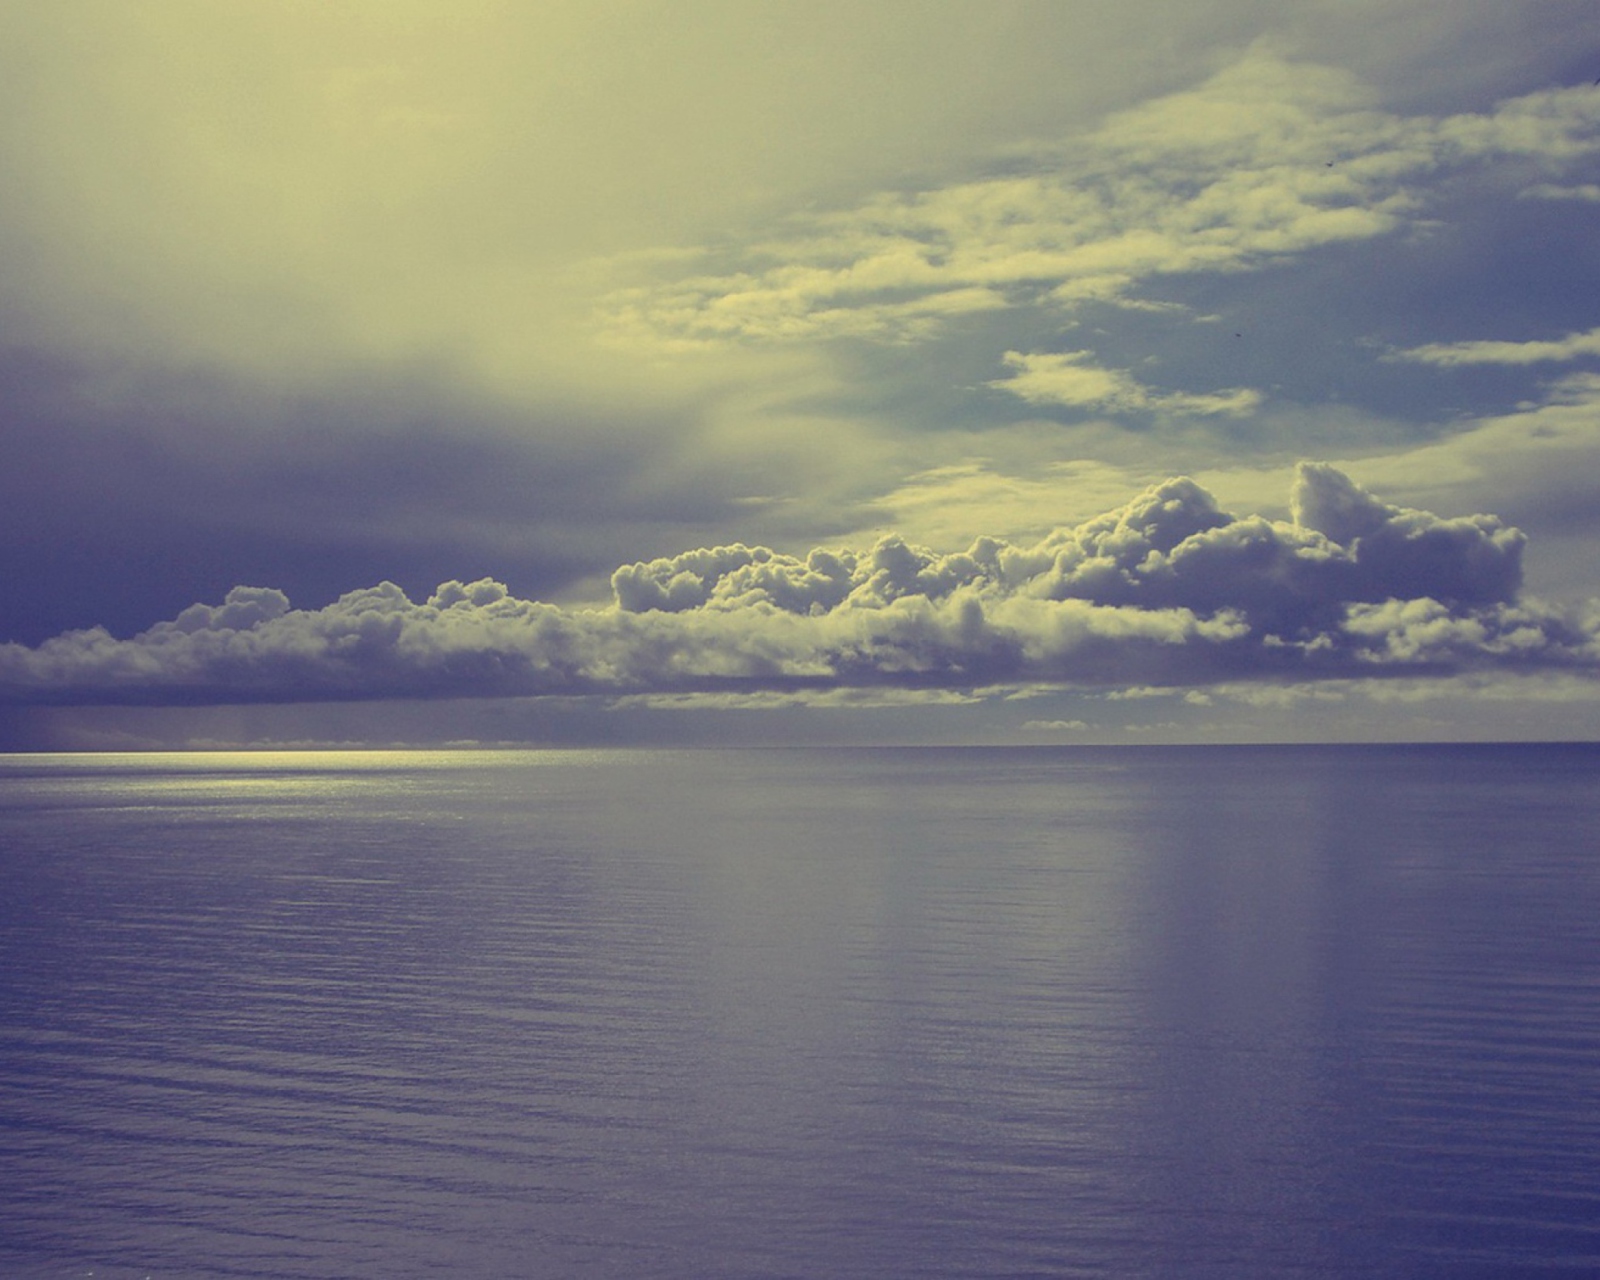 Sea And Clouds wallpaper 1600x1280